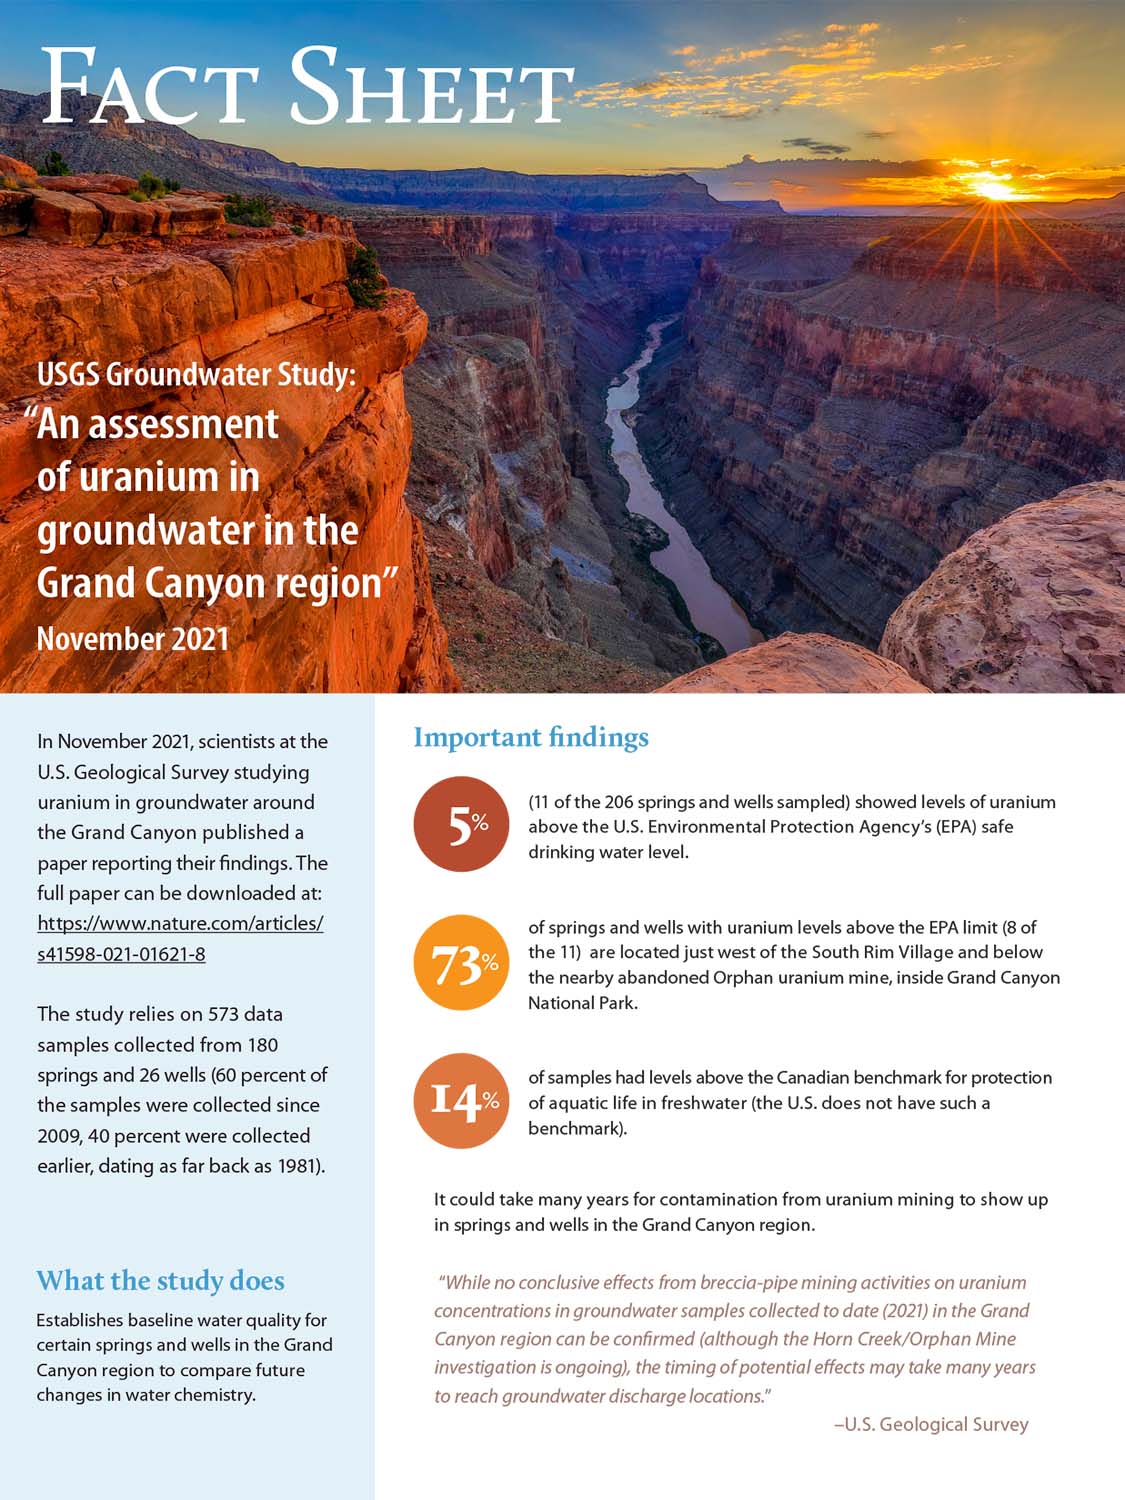 View the 2-page fact sheet on uranium in Grand Canyon groundwater